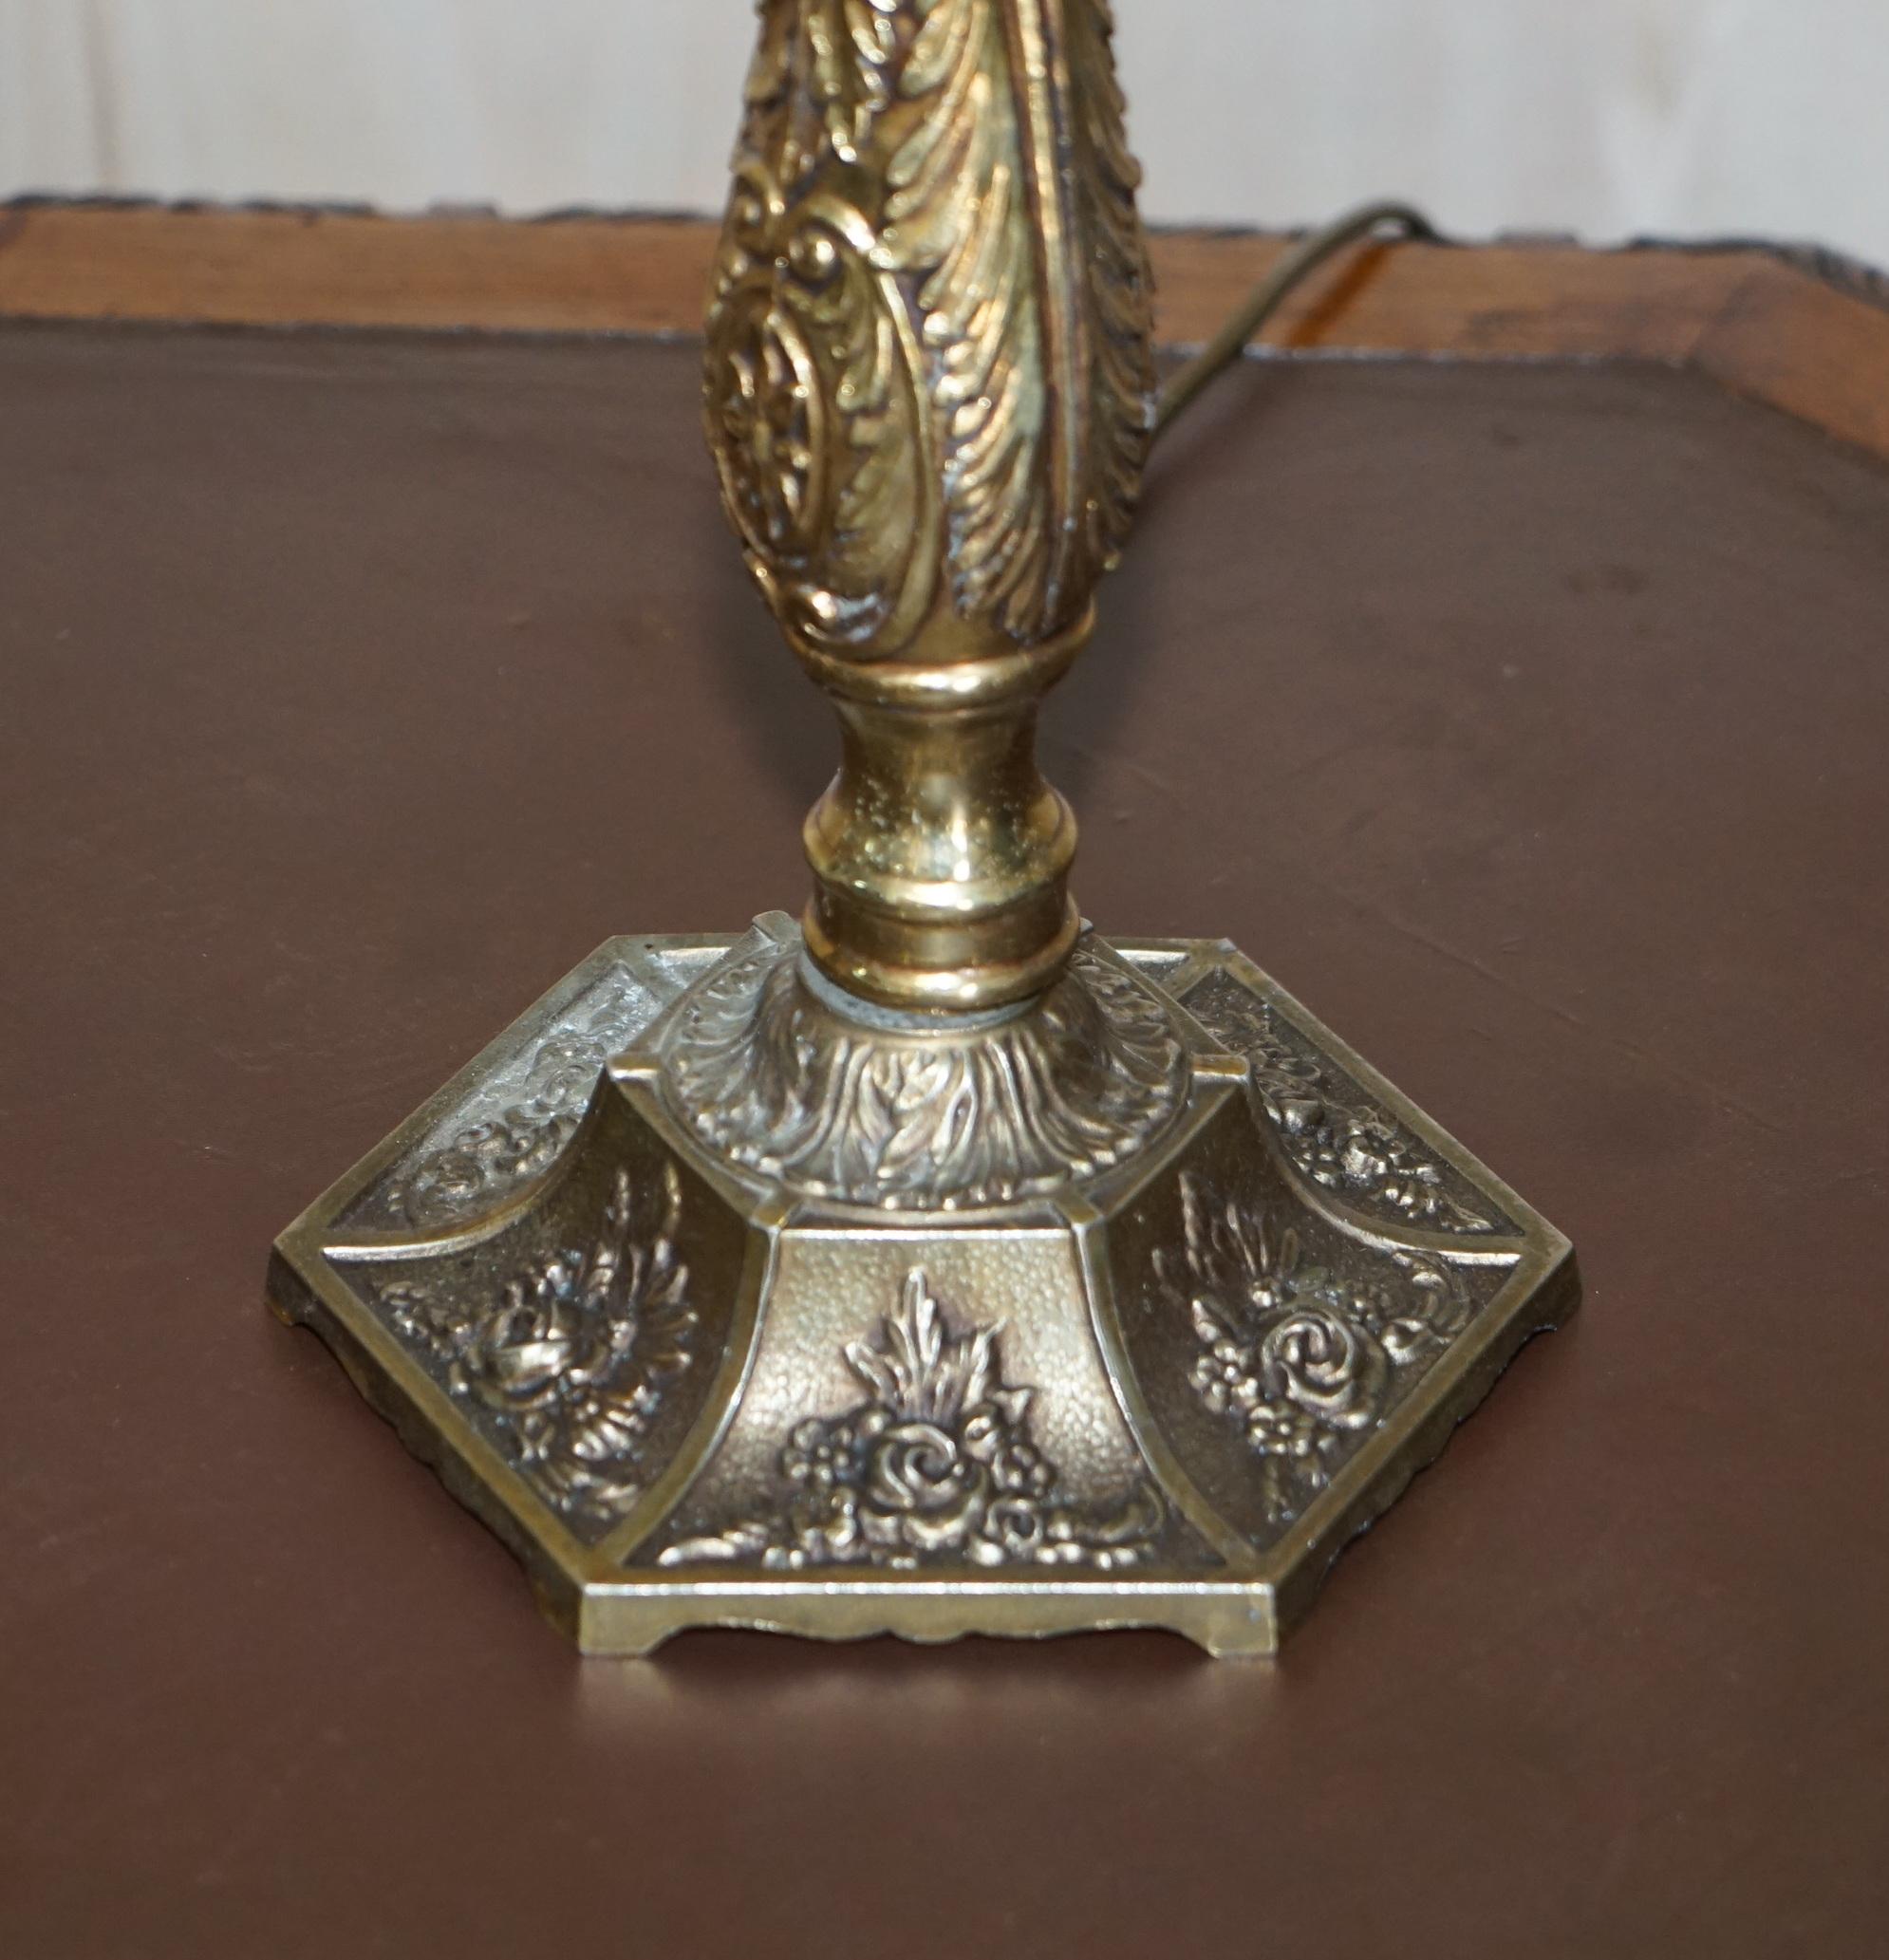 English Stunning Victorian Repousse Brass Table Lamp Very Decorative & Beautifully Cast For Sale